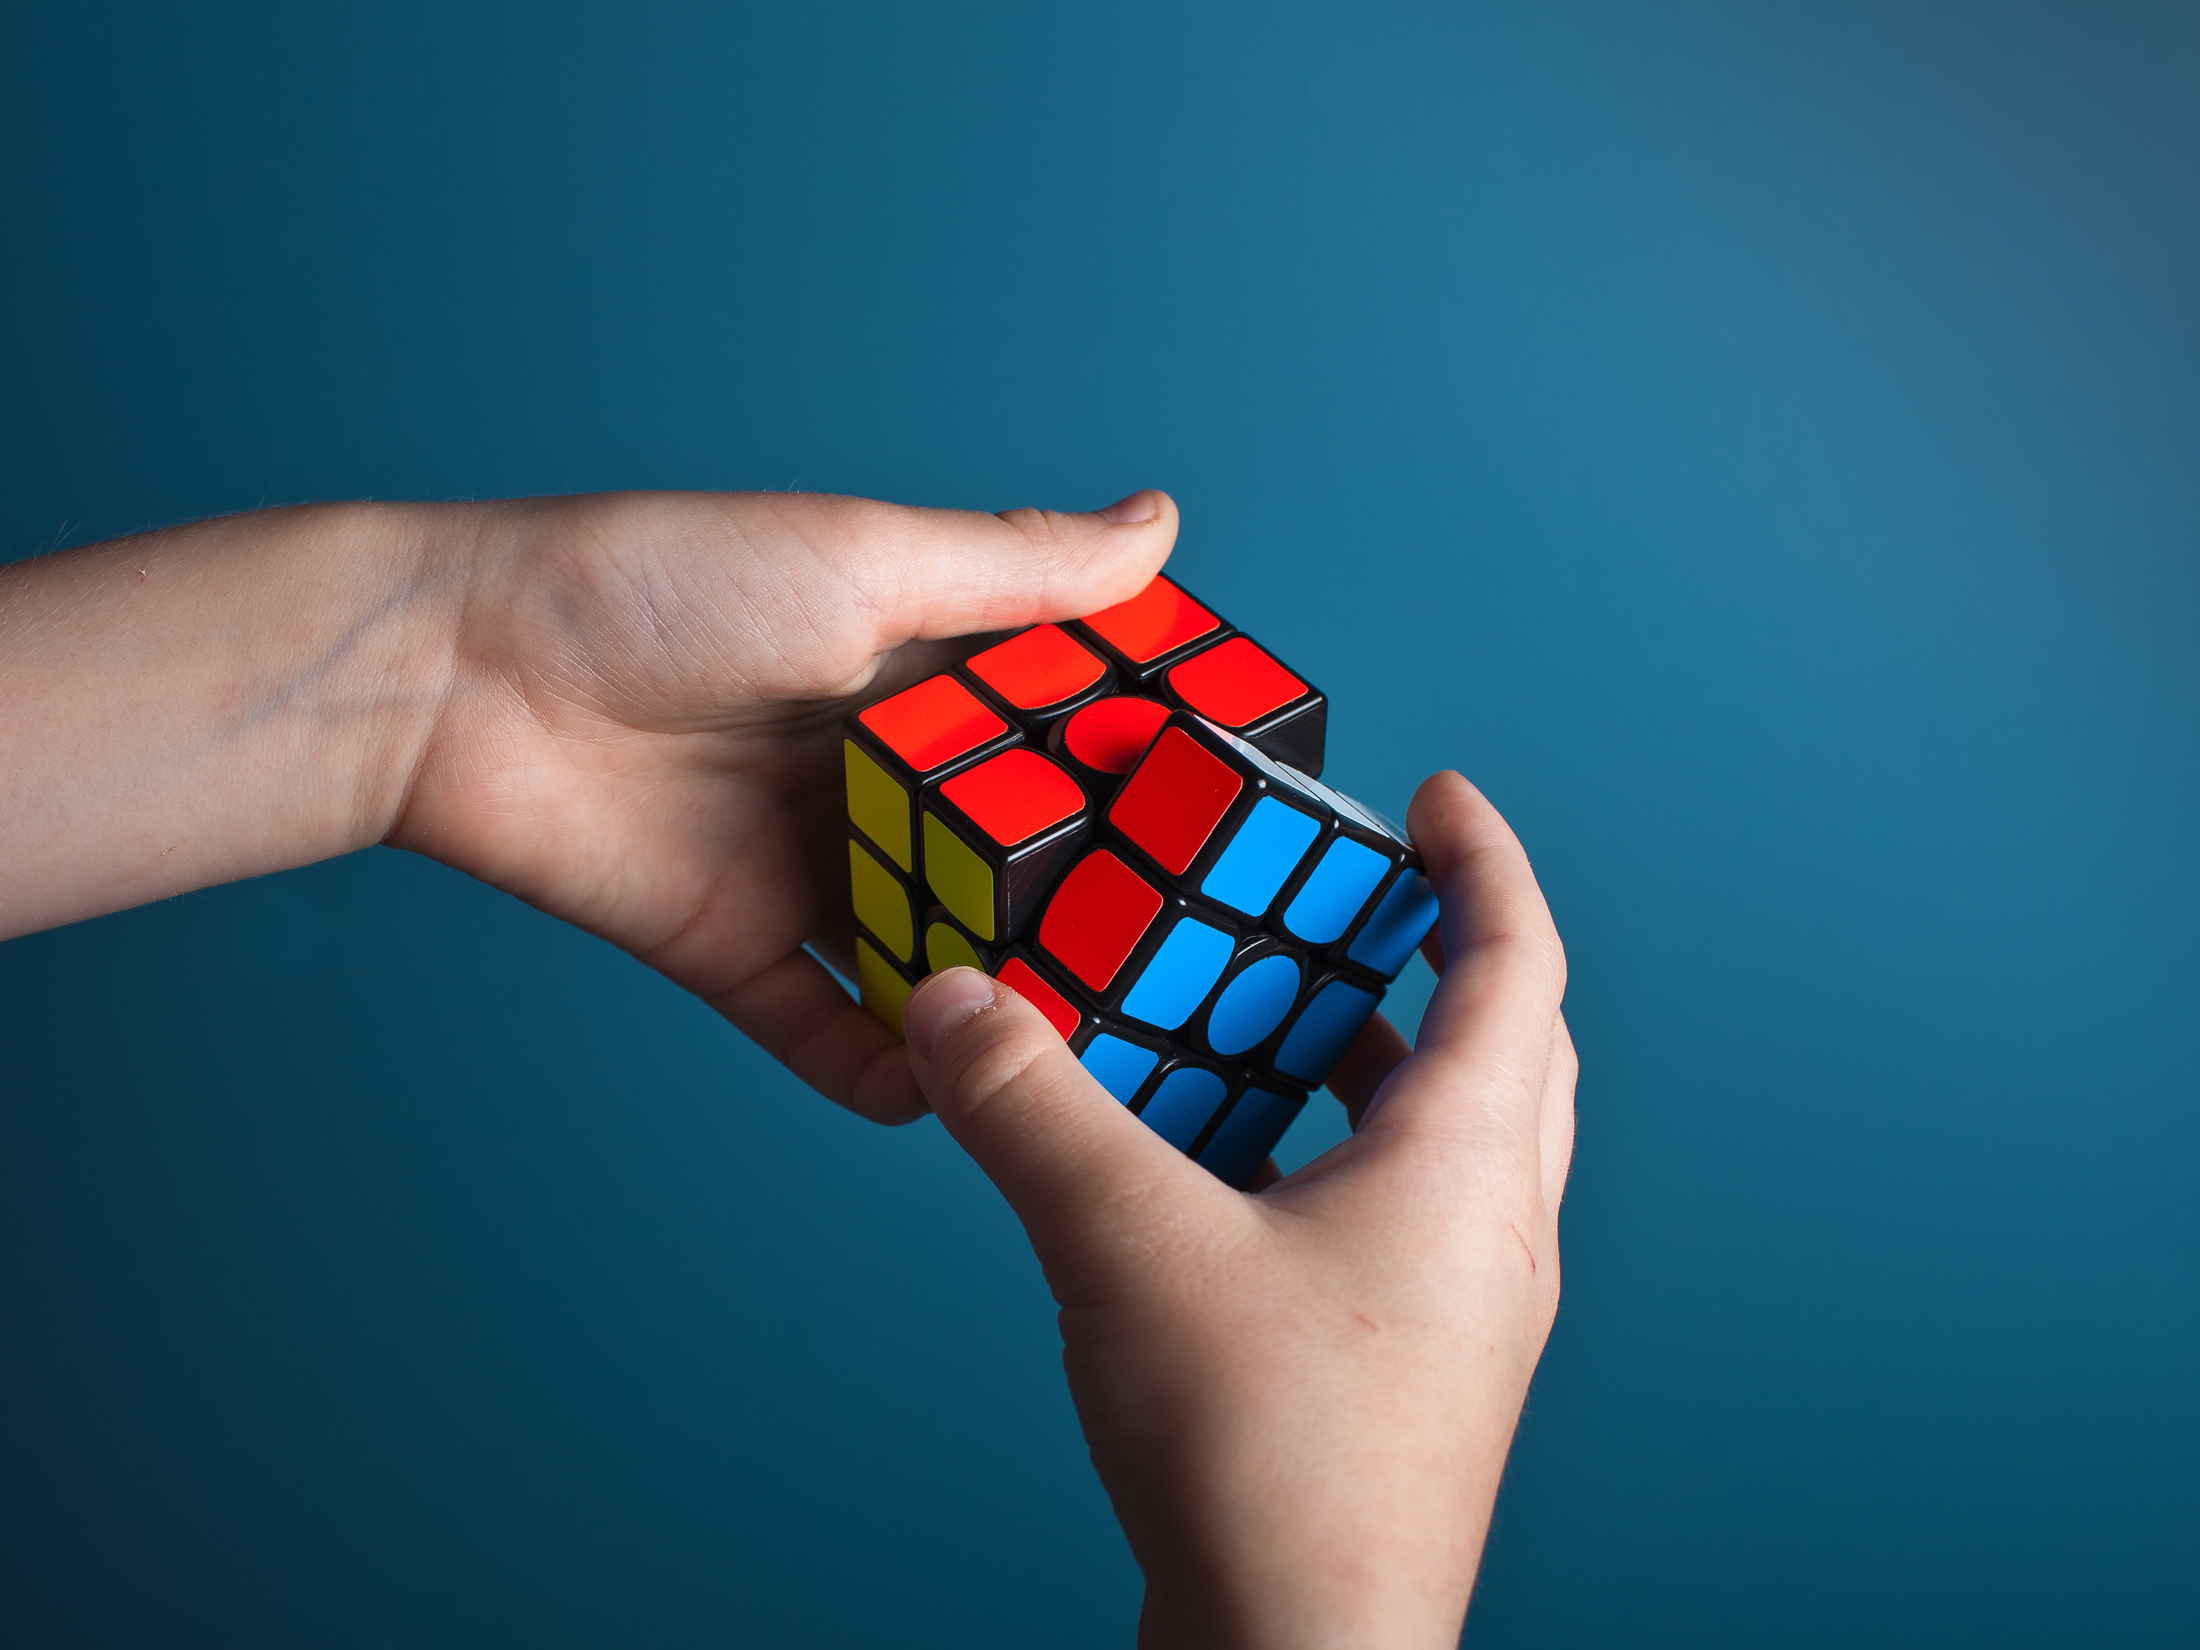 Rubik's Cube steps into the digital age, complete with online battles